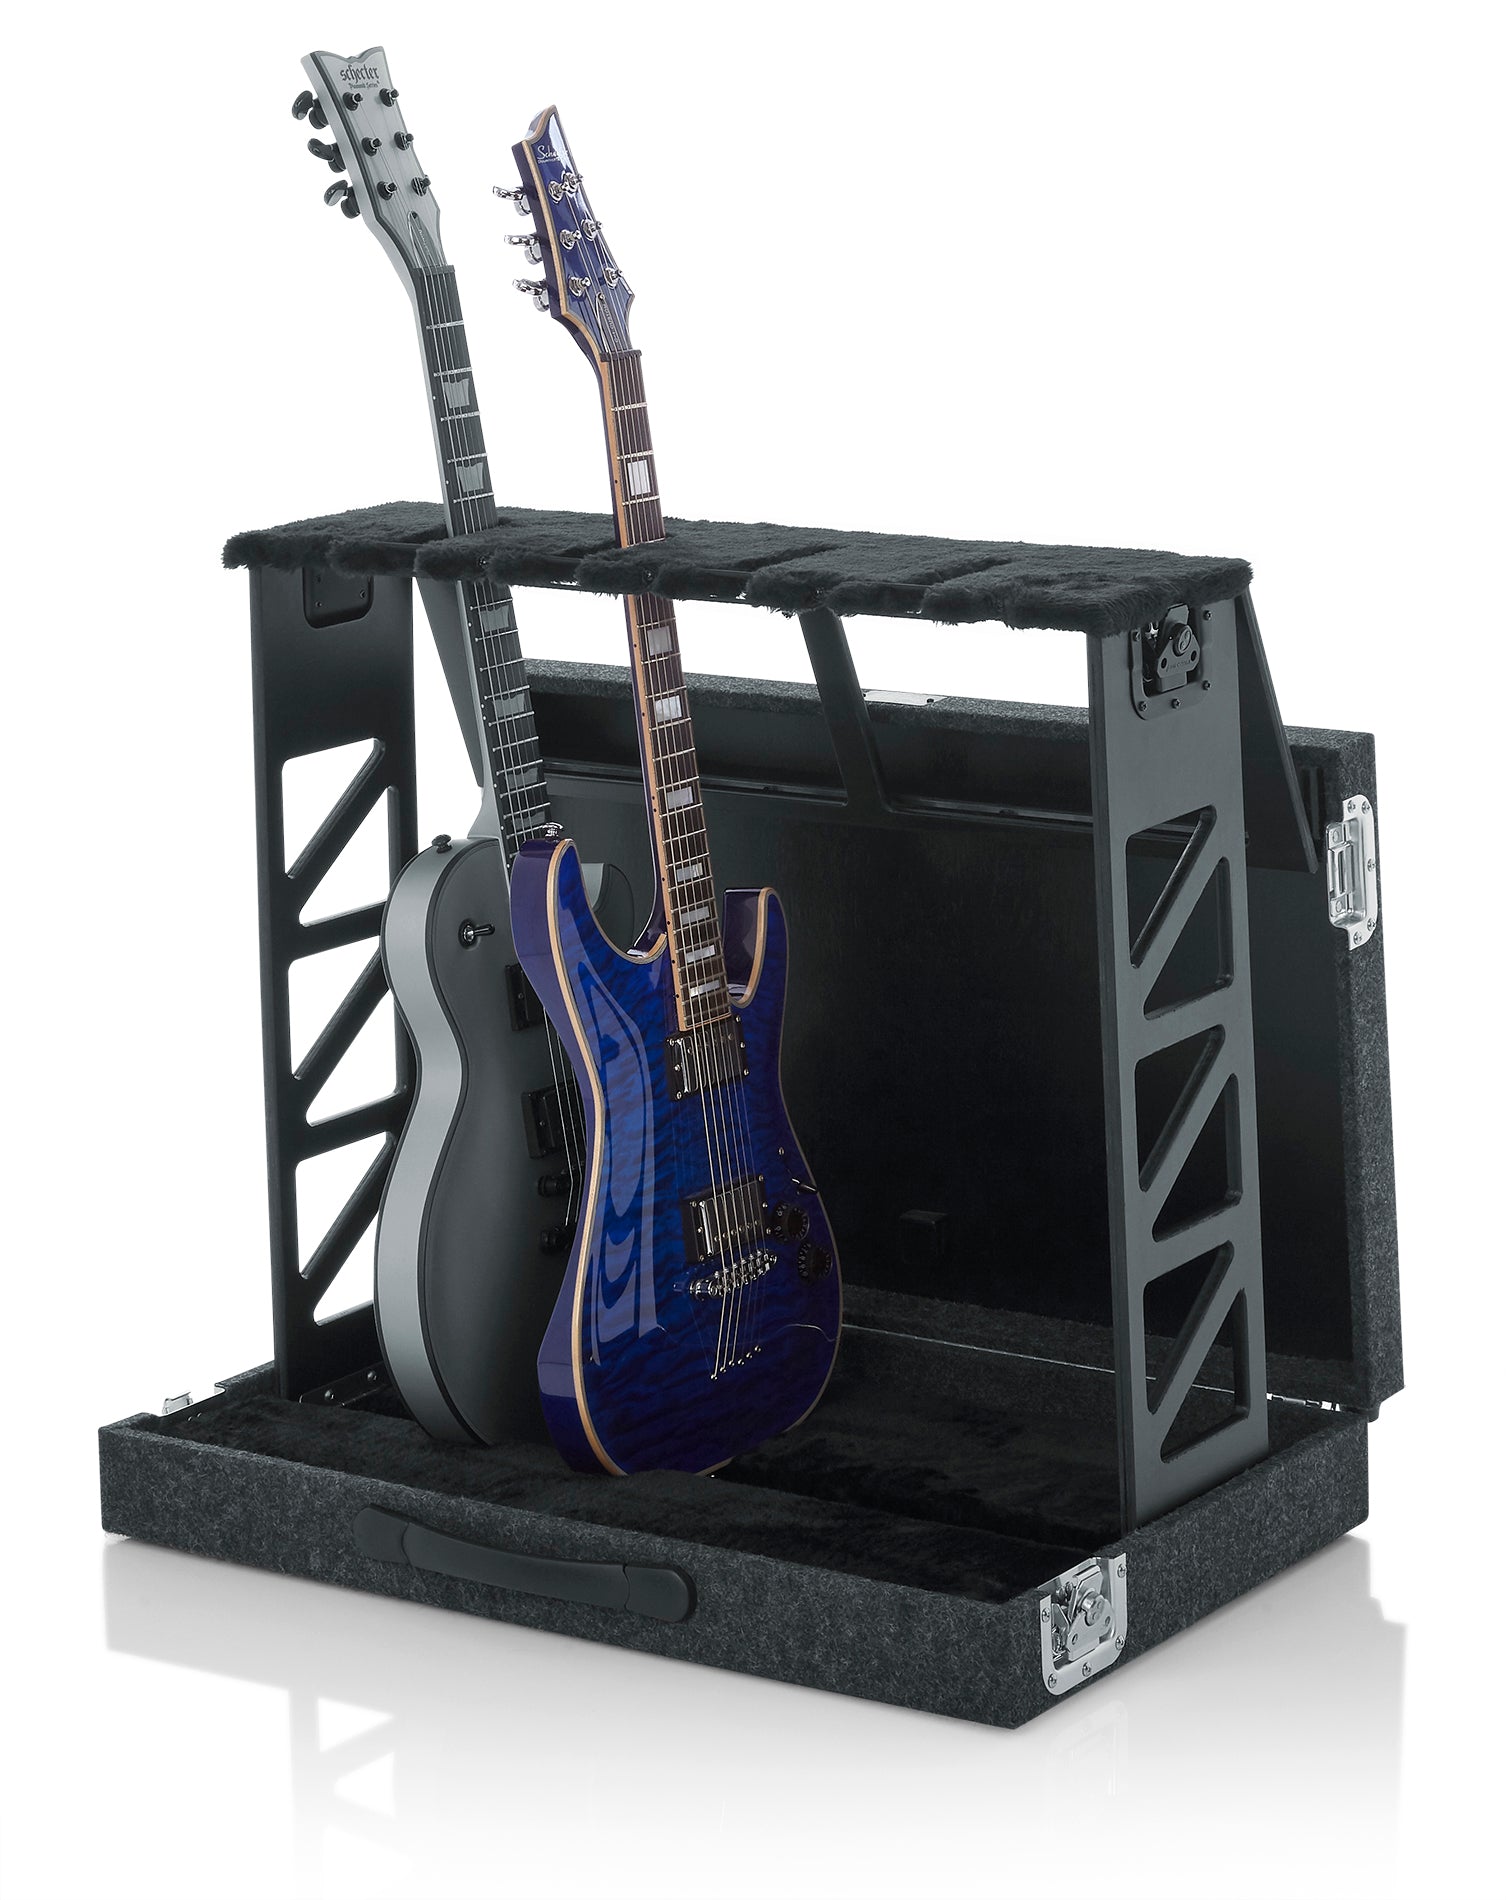 Gator Frameworks | Rack Style 4 Guitar Stand that Folds into Case